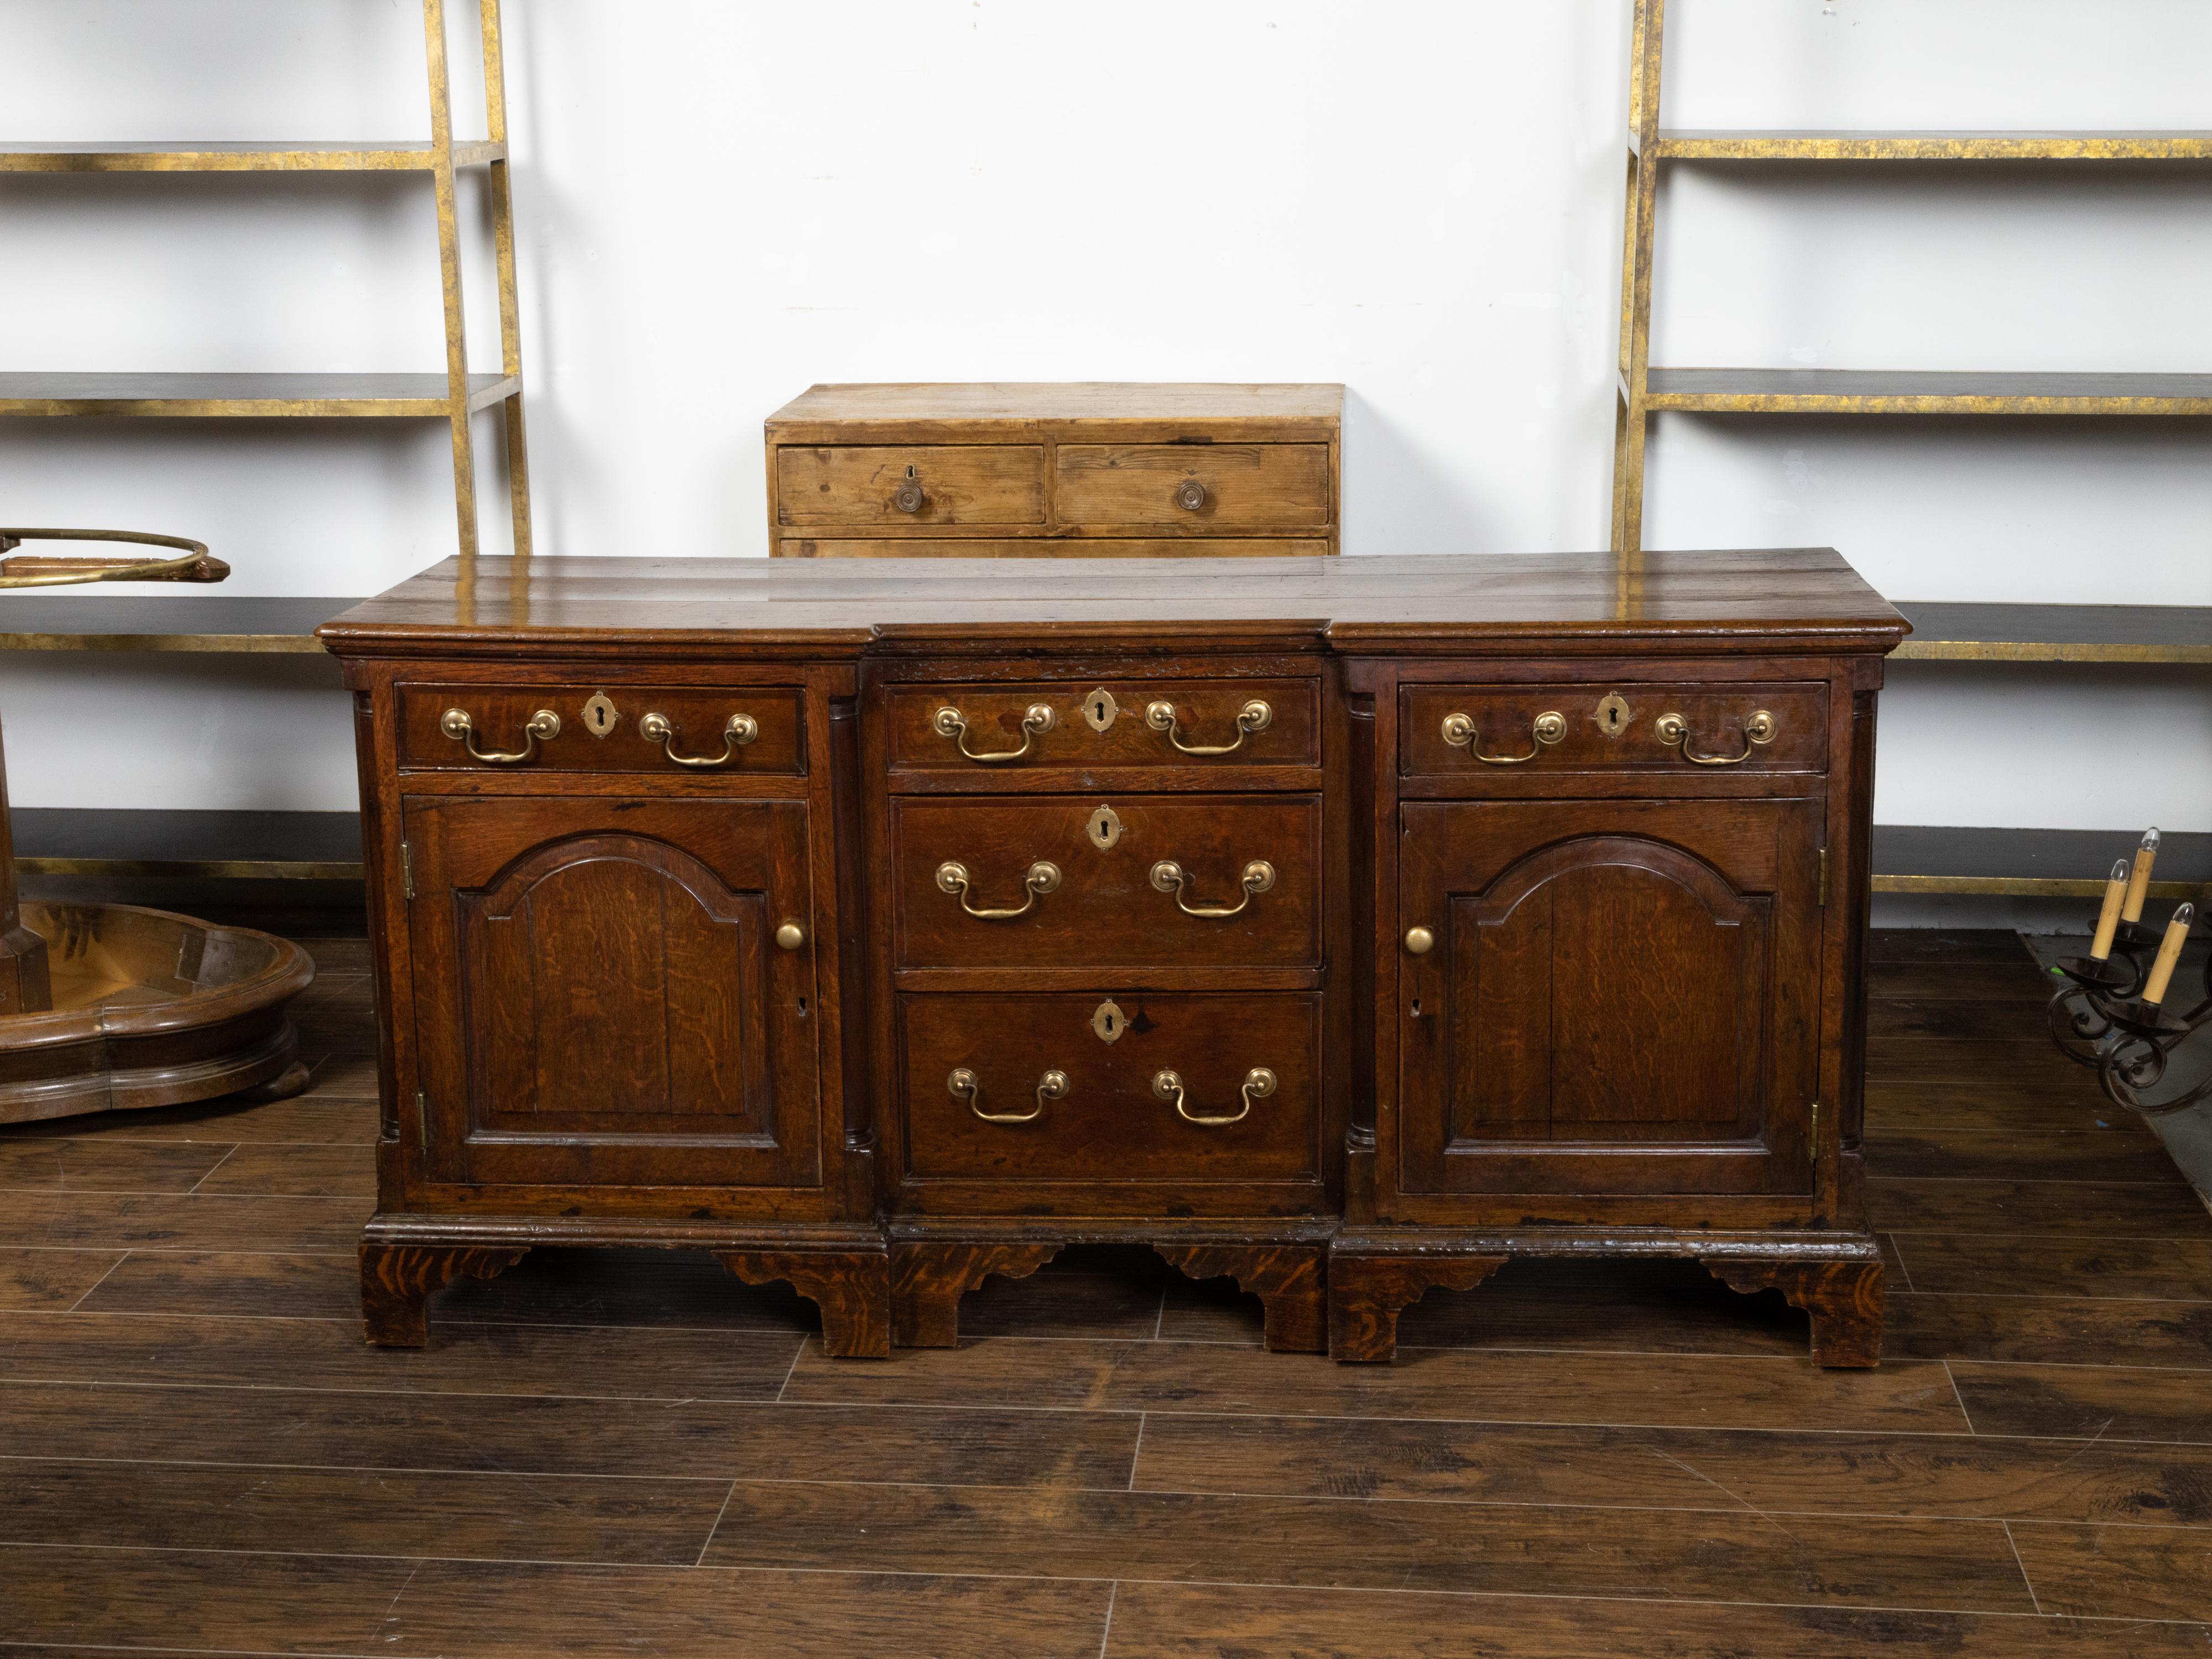 An English Georgian period oak dresser base from the early 19th century, with five drawers, two doors, brass hardware and veneered bracket feet. Created in England during the Georgian period in the early years of the 19th century, this oak piece,